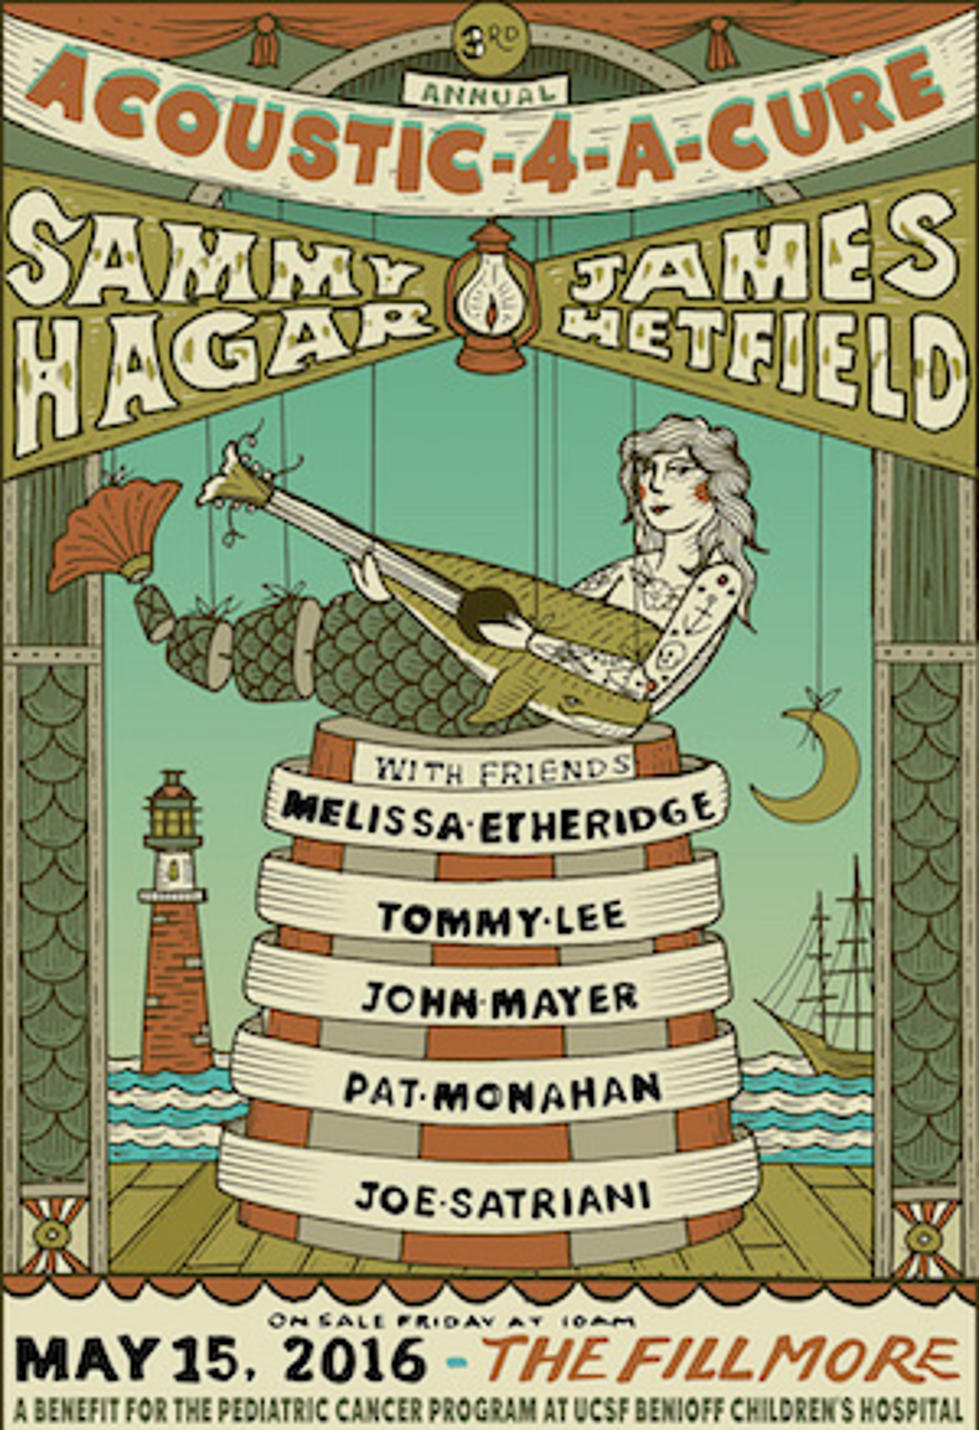 James Hetfield + Sammy Hagar Welcome Tommy Lee, Joe Satriani + More for 3rd Annual Acoustic-4-a-Cure Benefit